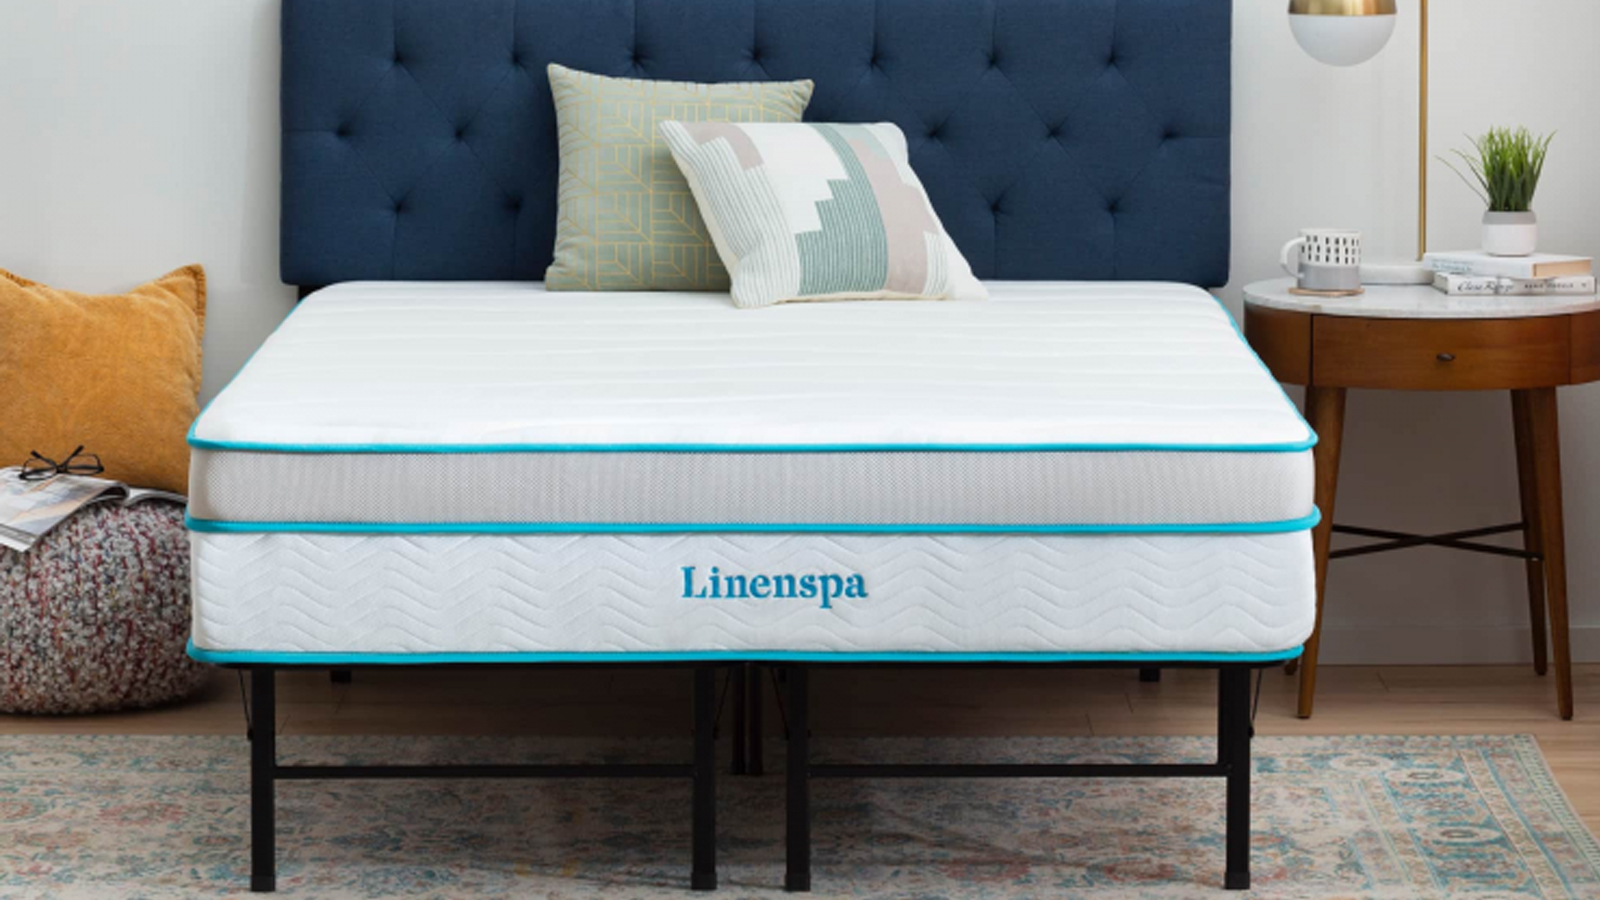 Linenspa 12-inch Memory Foam and Innerspring Hybrid Mattress on a metal bed frame